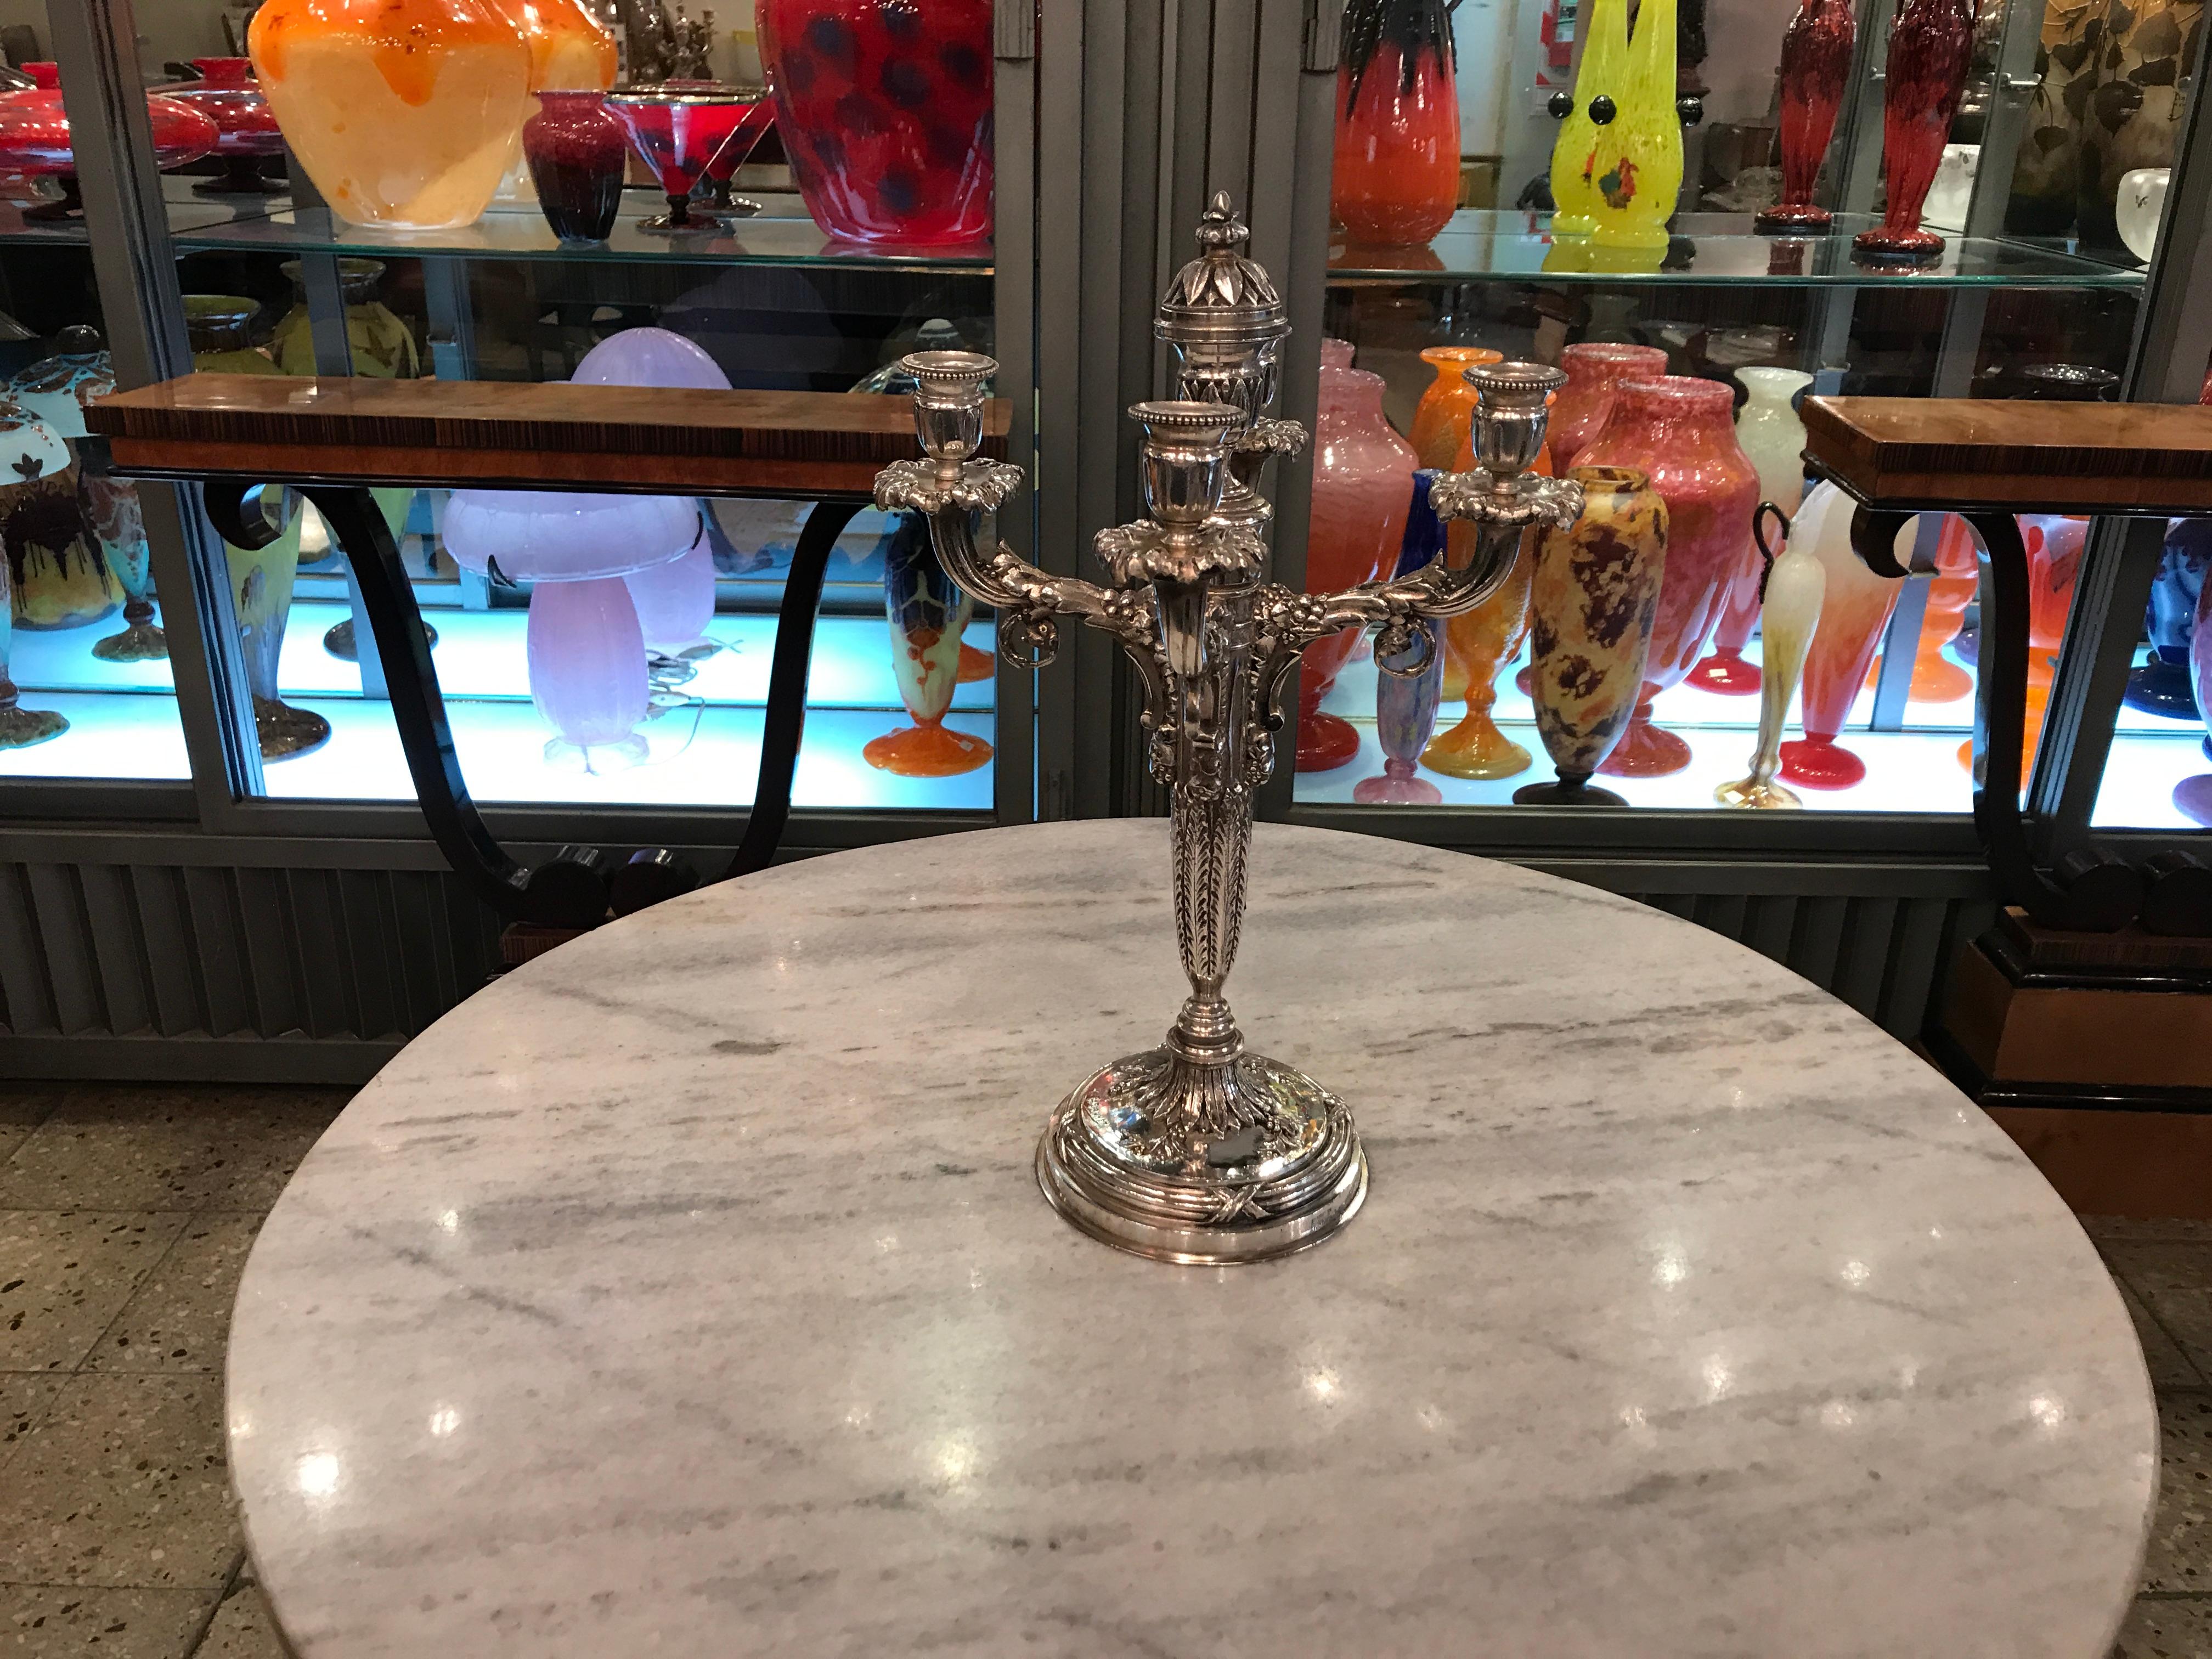 Pair of Candelabras

Sign: A. Marionnet (Albert Marionnet)
Metal: Silver plated
We have specialized in the sale of Art Deco and Art Nouveau and Vintage styles since 1982.If you have any questions we are at your disposal.
Pushing the button that